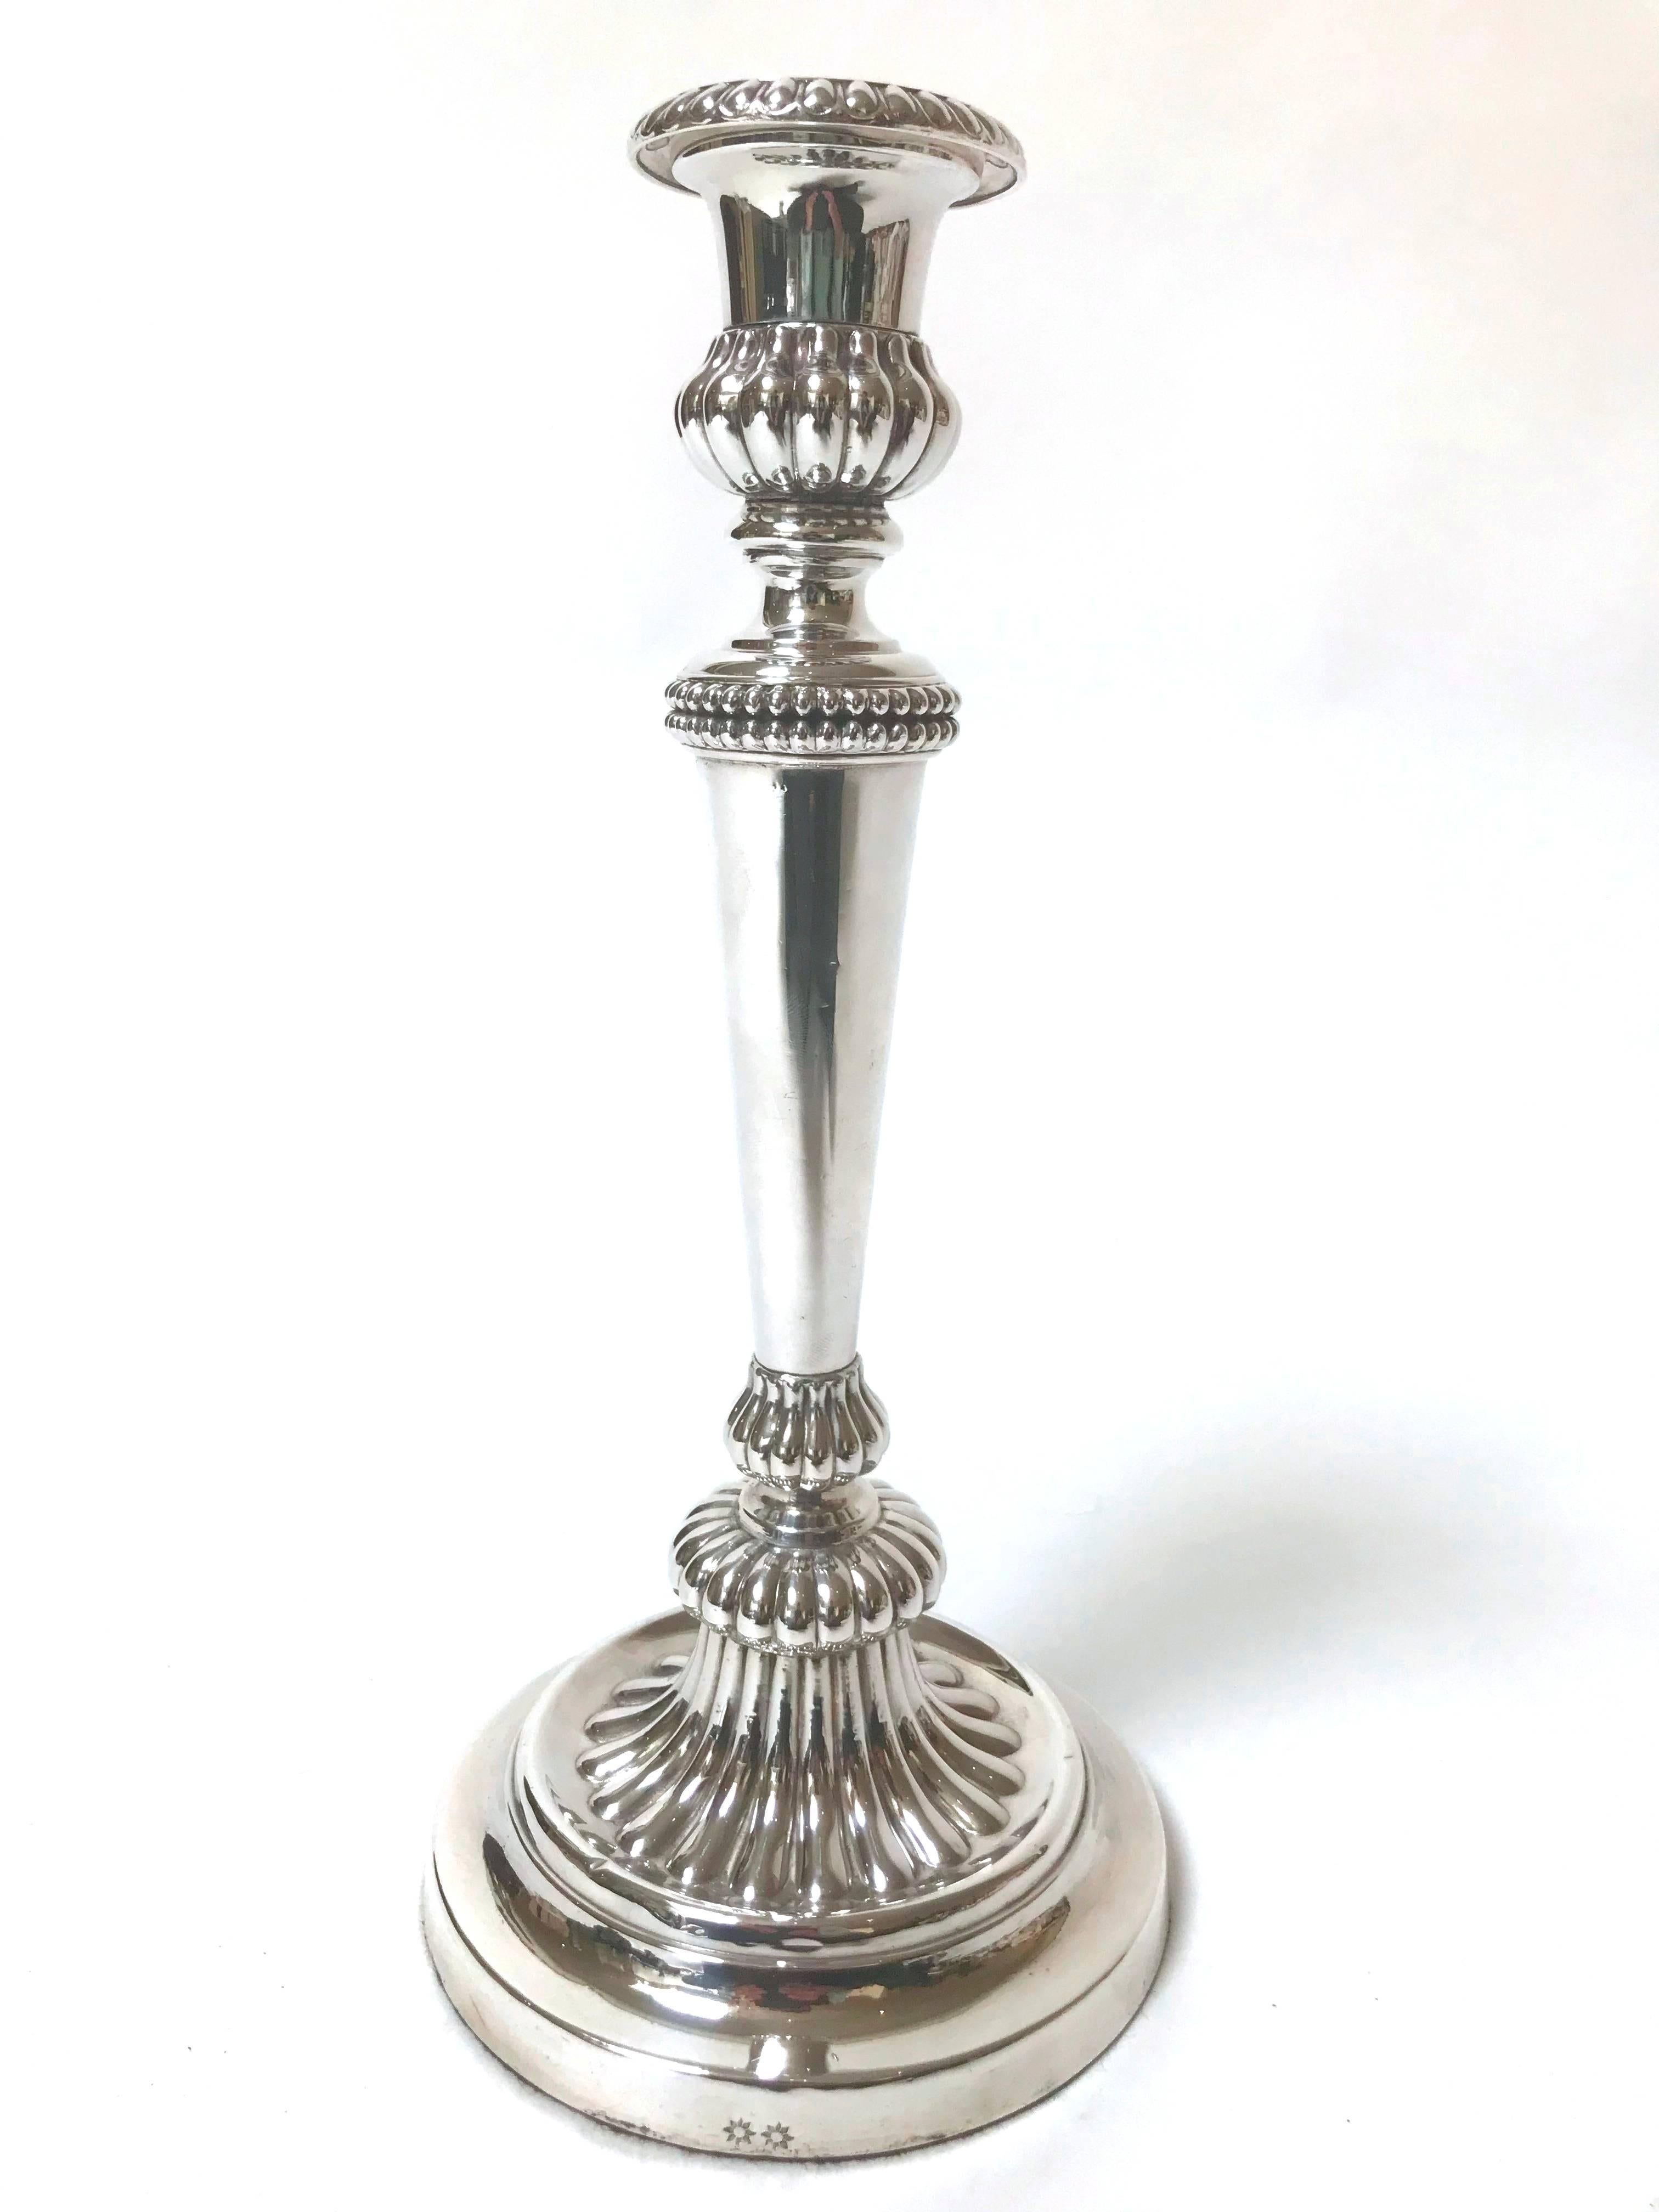 A rare set of four late George III plated silver candlesticks, circa 1790-1820, marked for Matthew Boulton, Birmingham, England. Marks: Double sunburst punch, 11-3/4 inches high, each having a tapered cylindrical standard rising from a circular